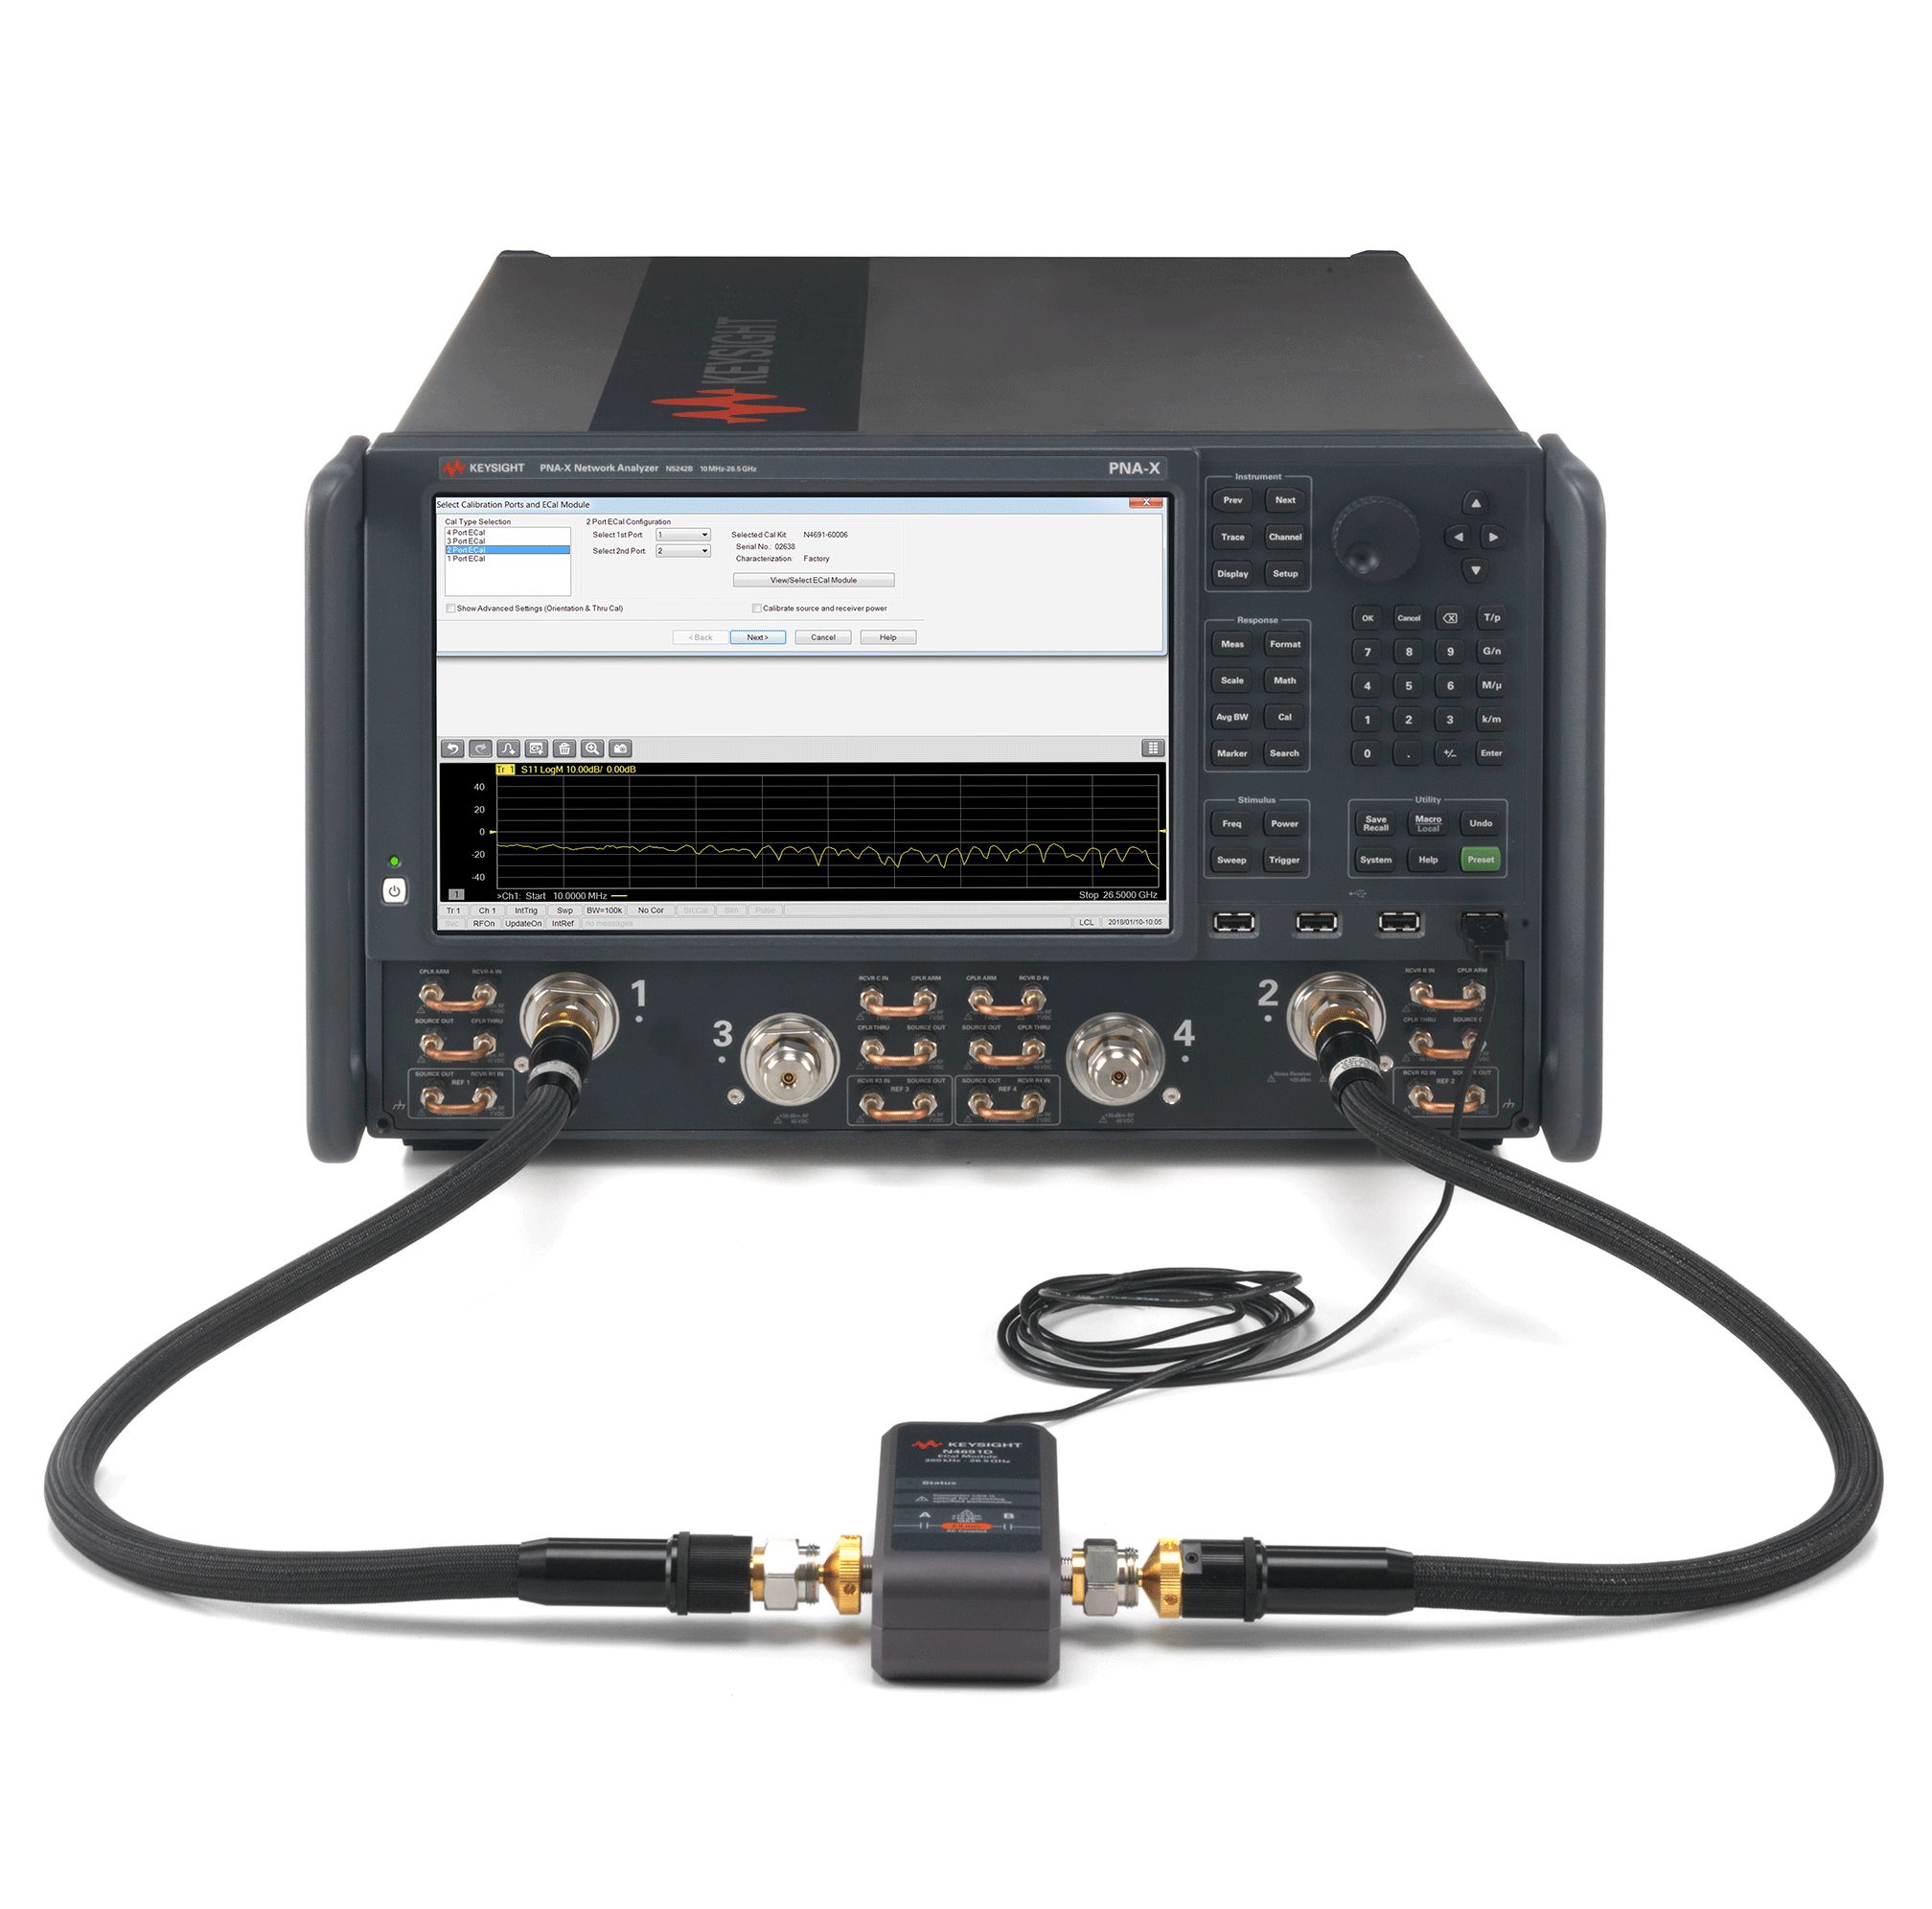 Picture of a Keysight Technologies N4694D